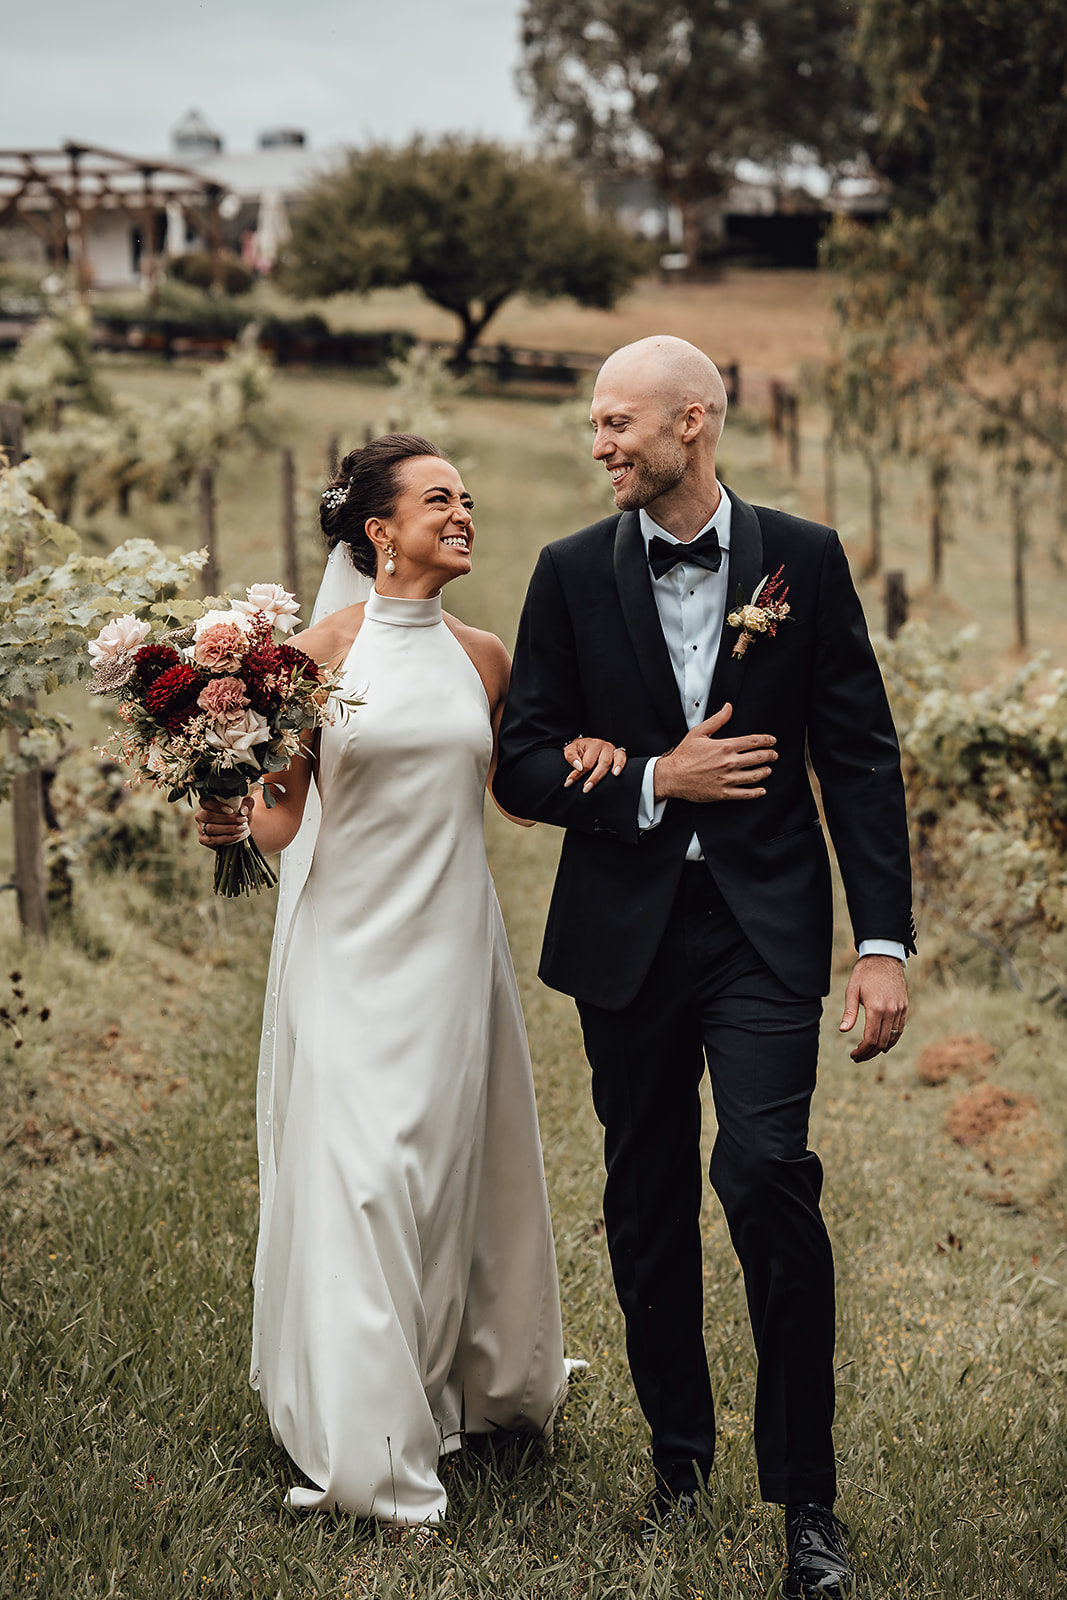 A beautiful couple getting married at The Farm Yarra Valley